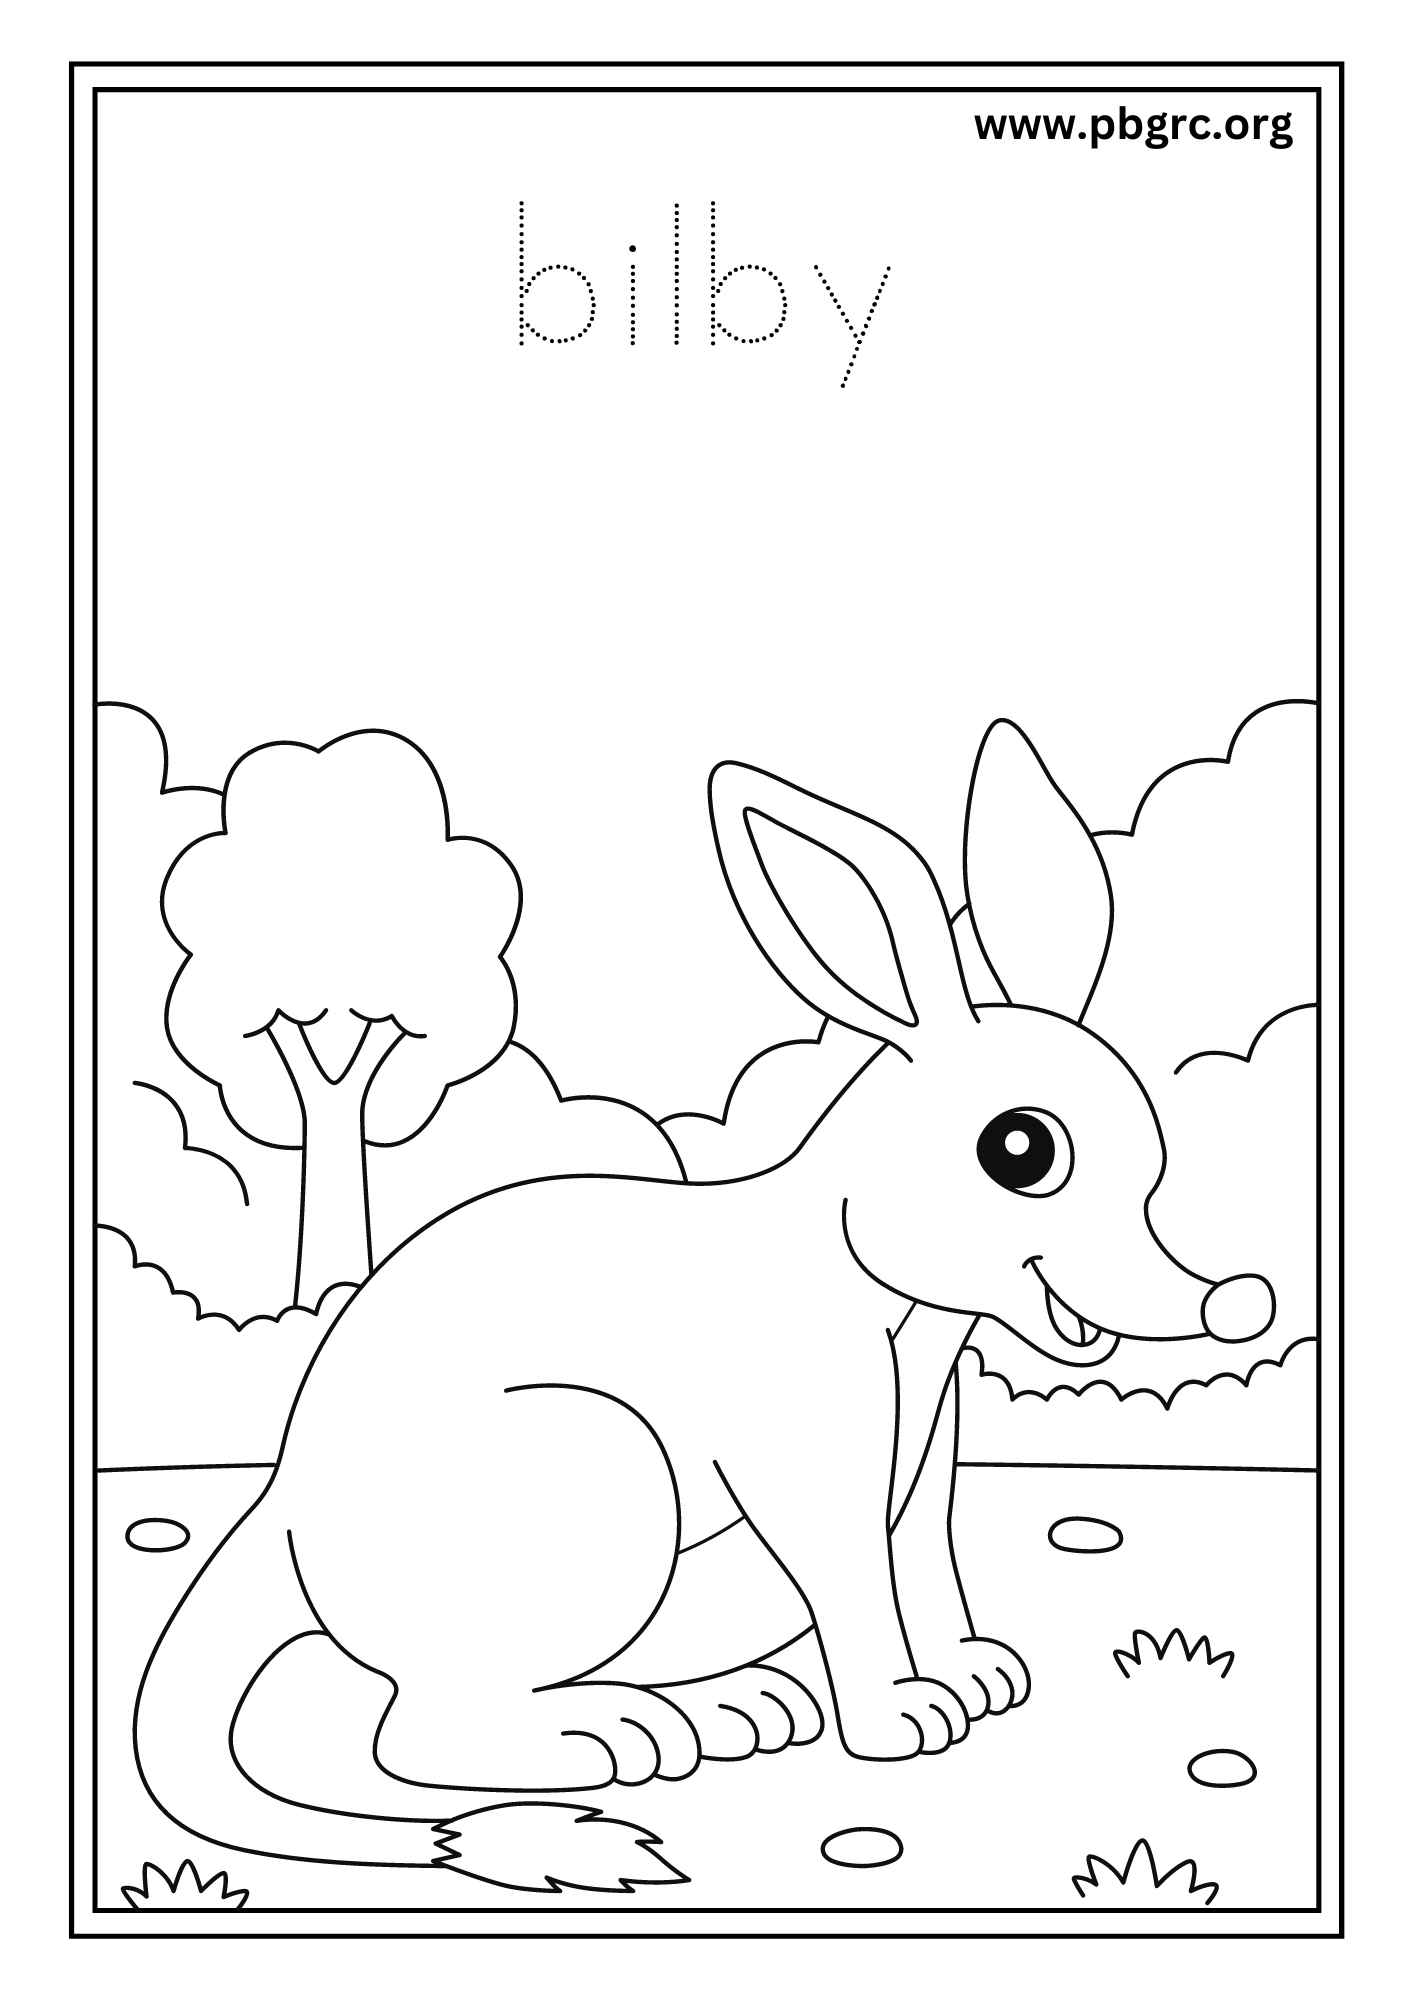 Adult Animal Coloring Pages